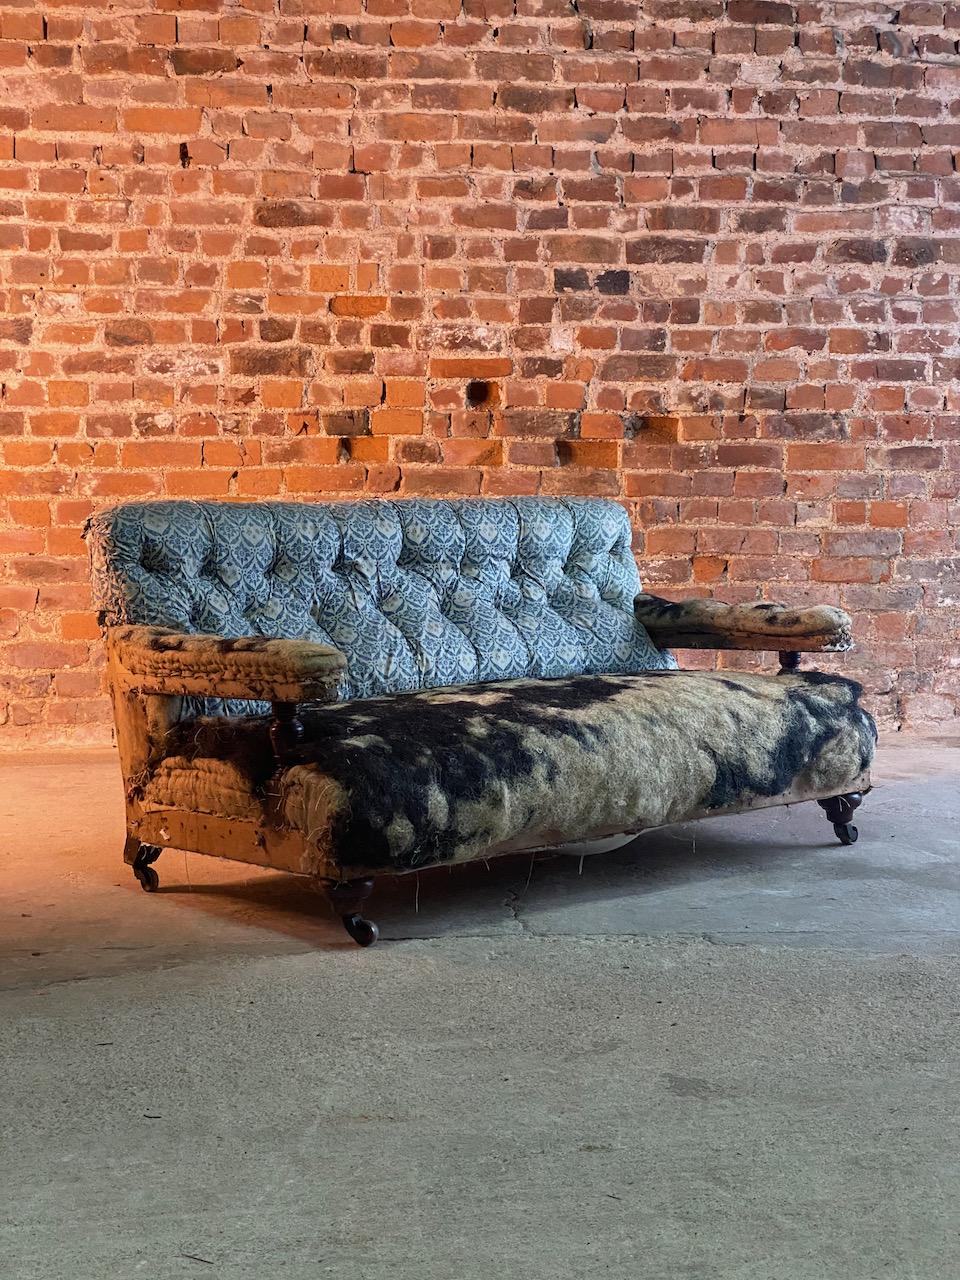 Antique Howard & Sons sofa 19th century England, circa 1870

A stunning antique 19th century Howard & Sons English Country house sofa, London circa1870, the button down upholstered back and stuff over seat flanked by arms resting on turned